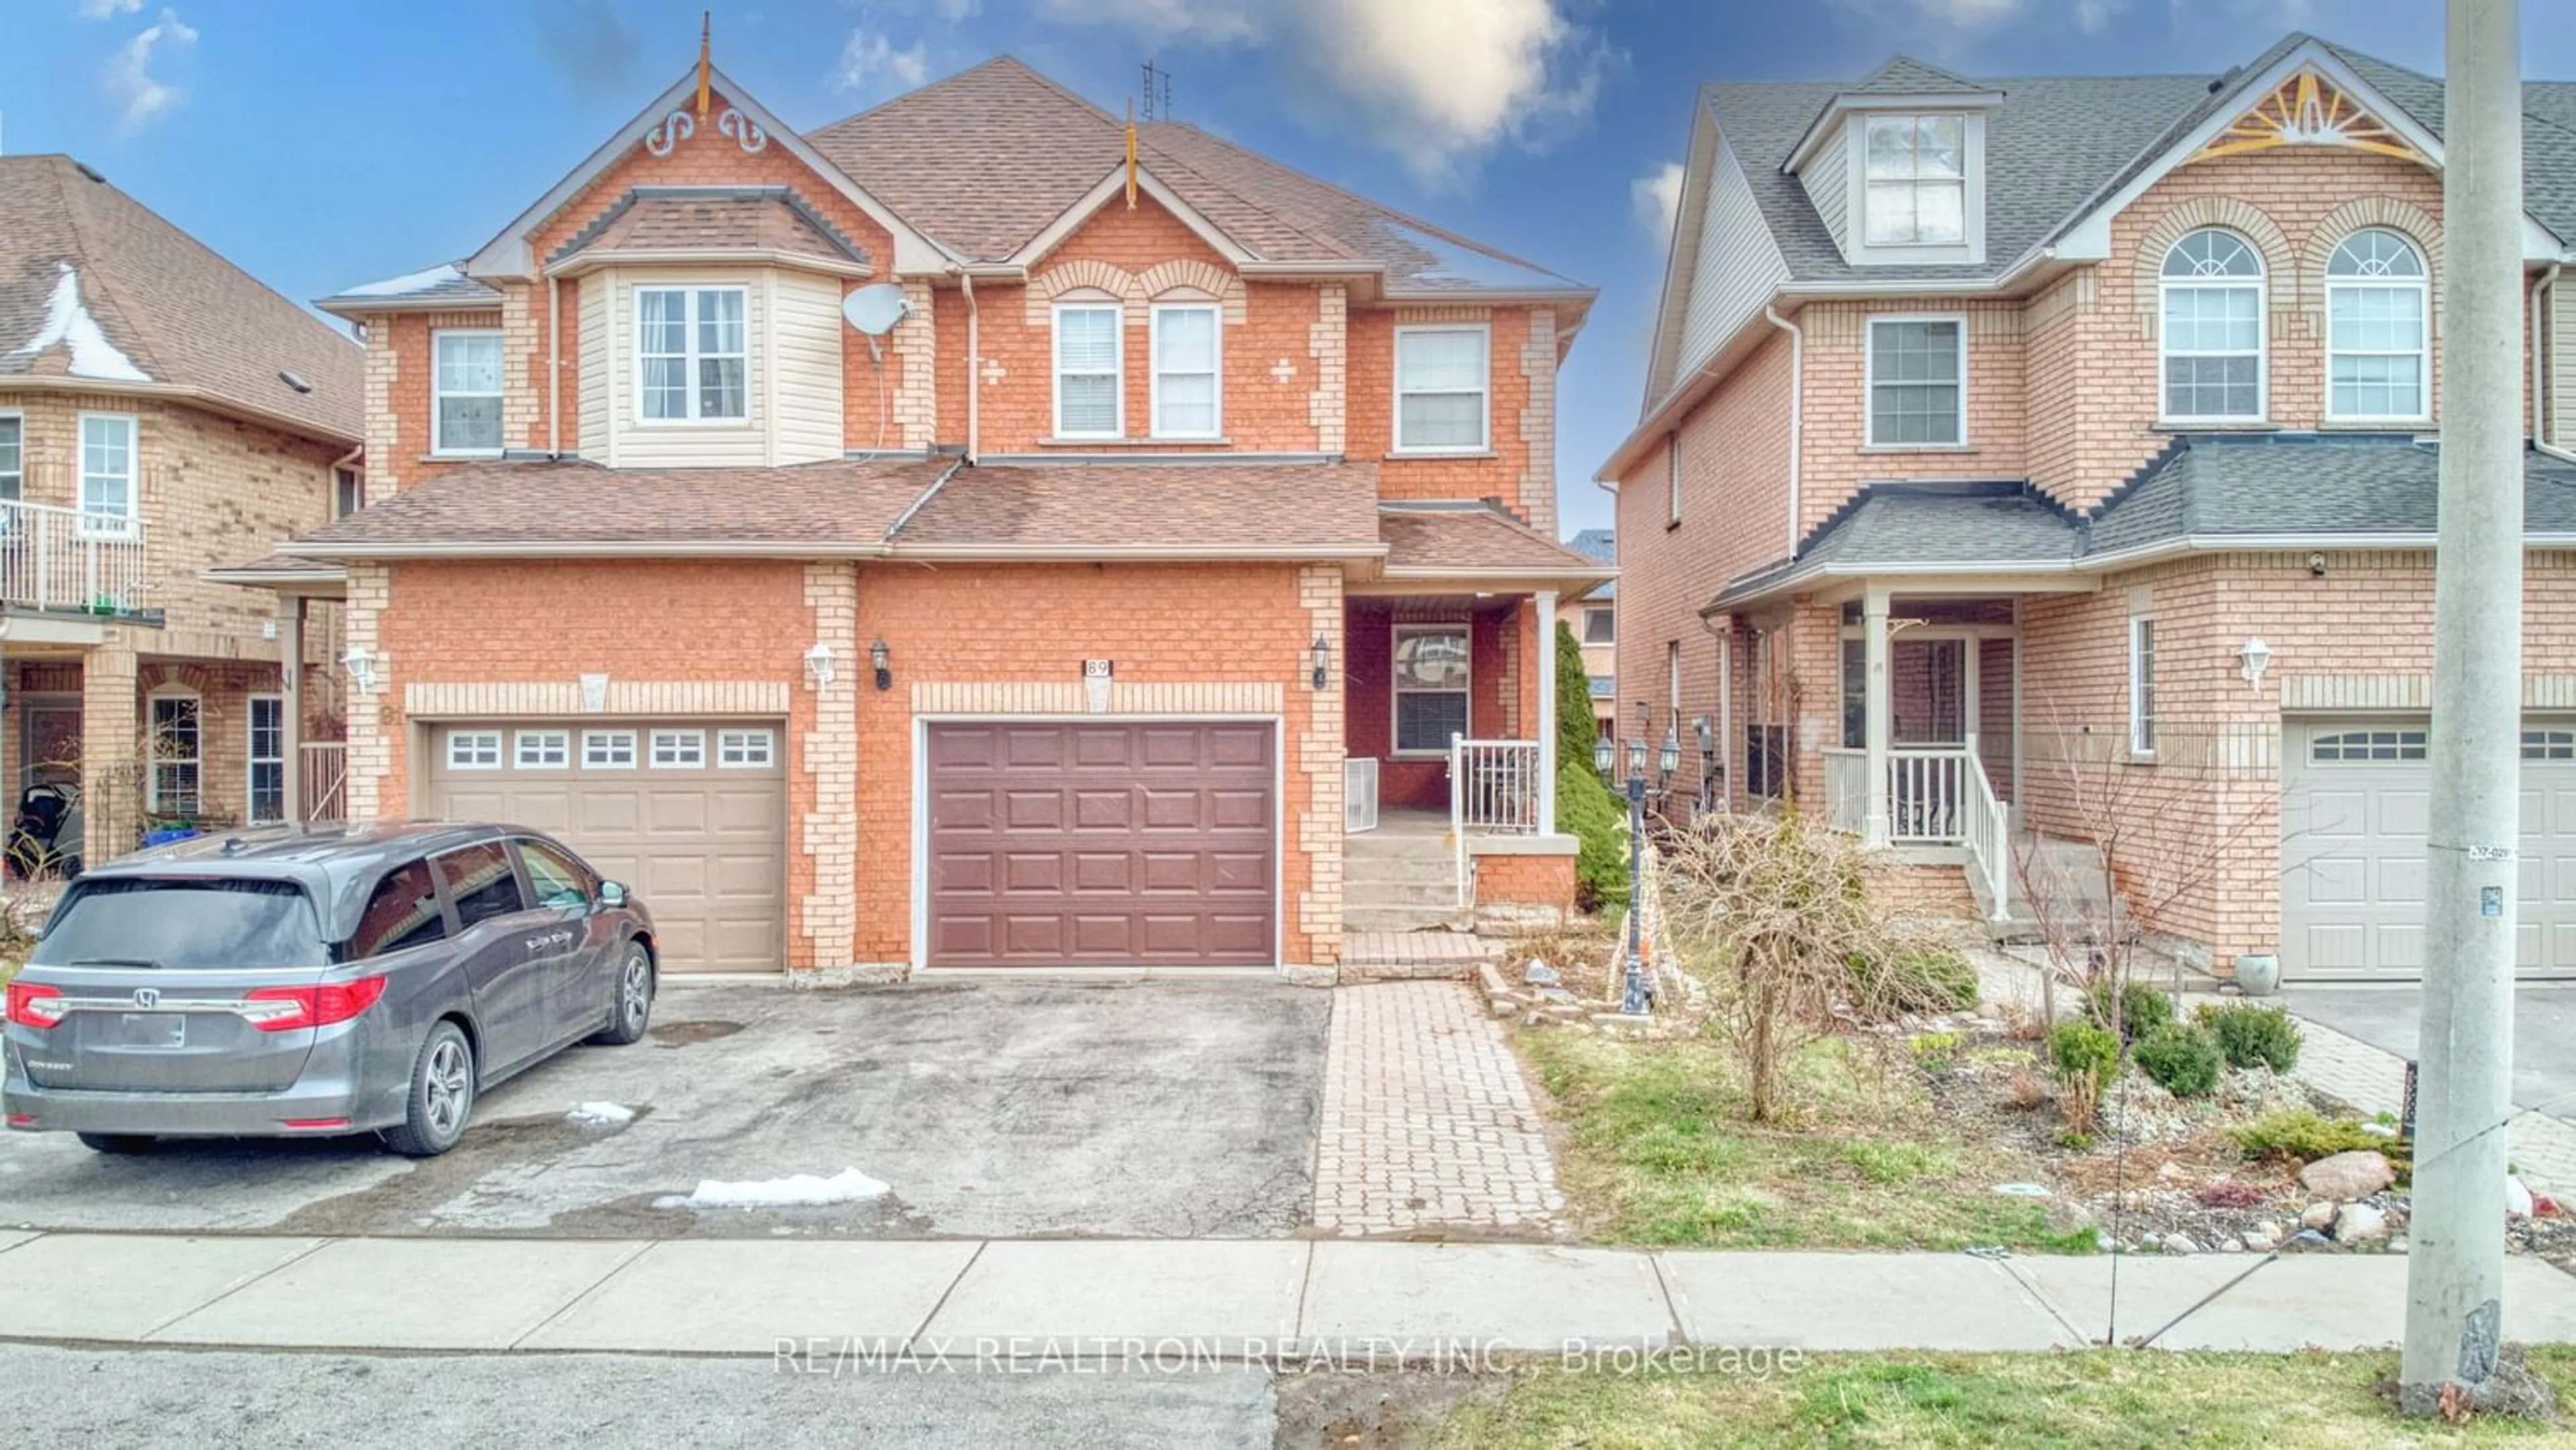 Home with brick exterior material for 89 English Oak Dr, Richmond Hill Ontario L4E 3X4